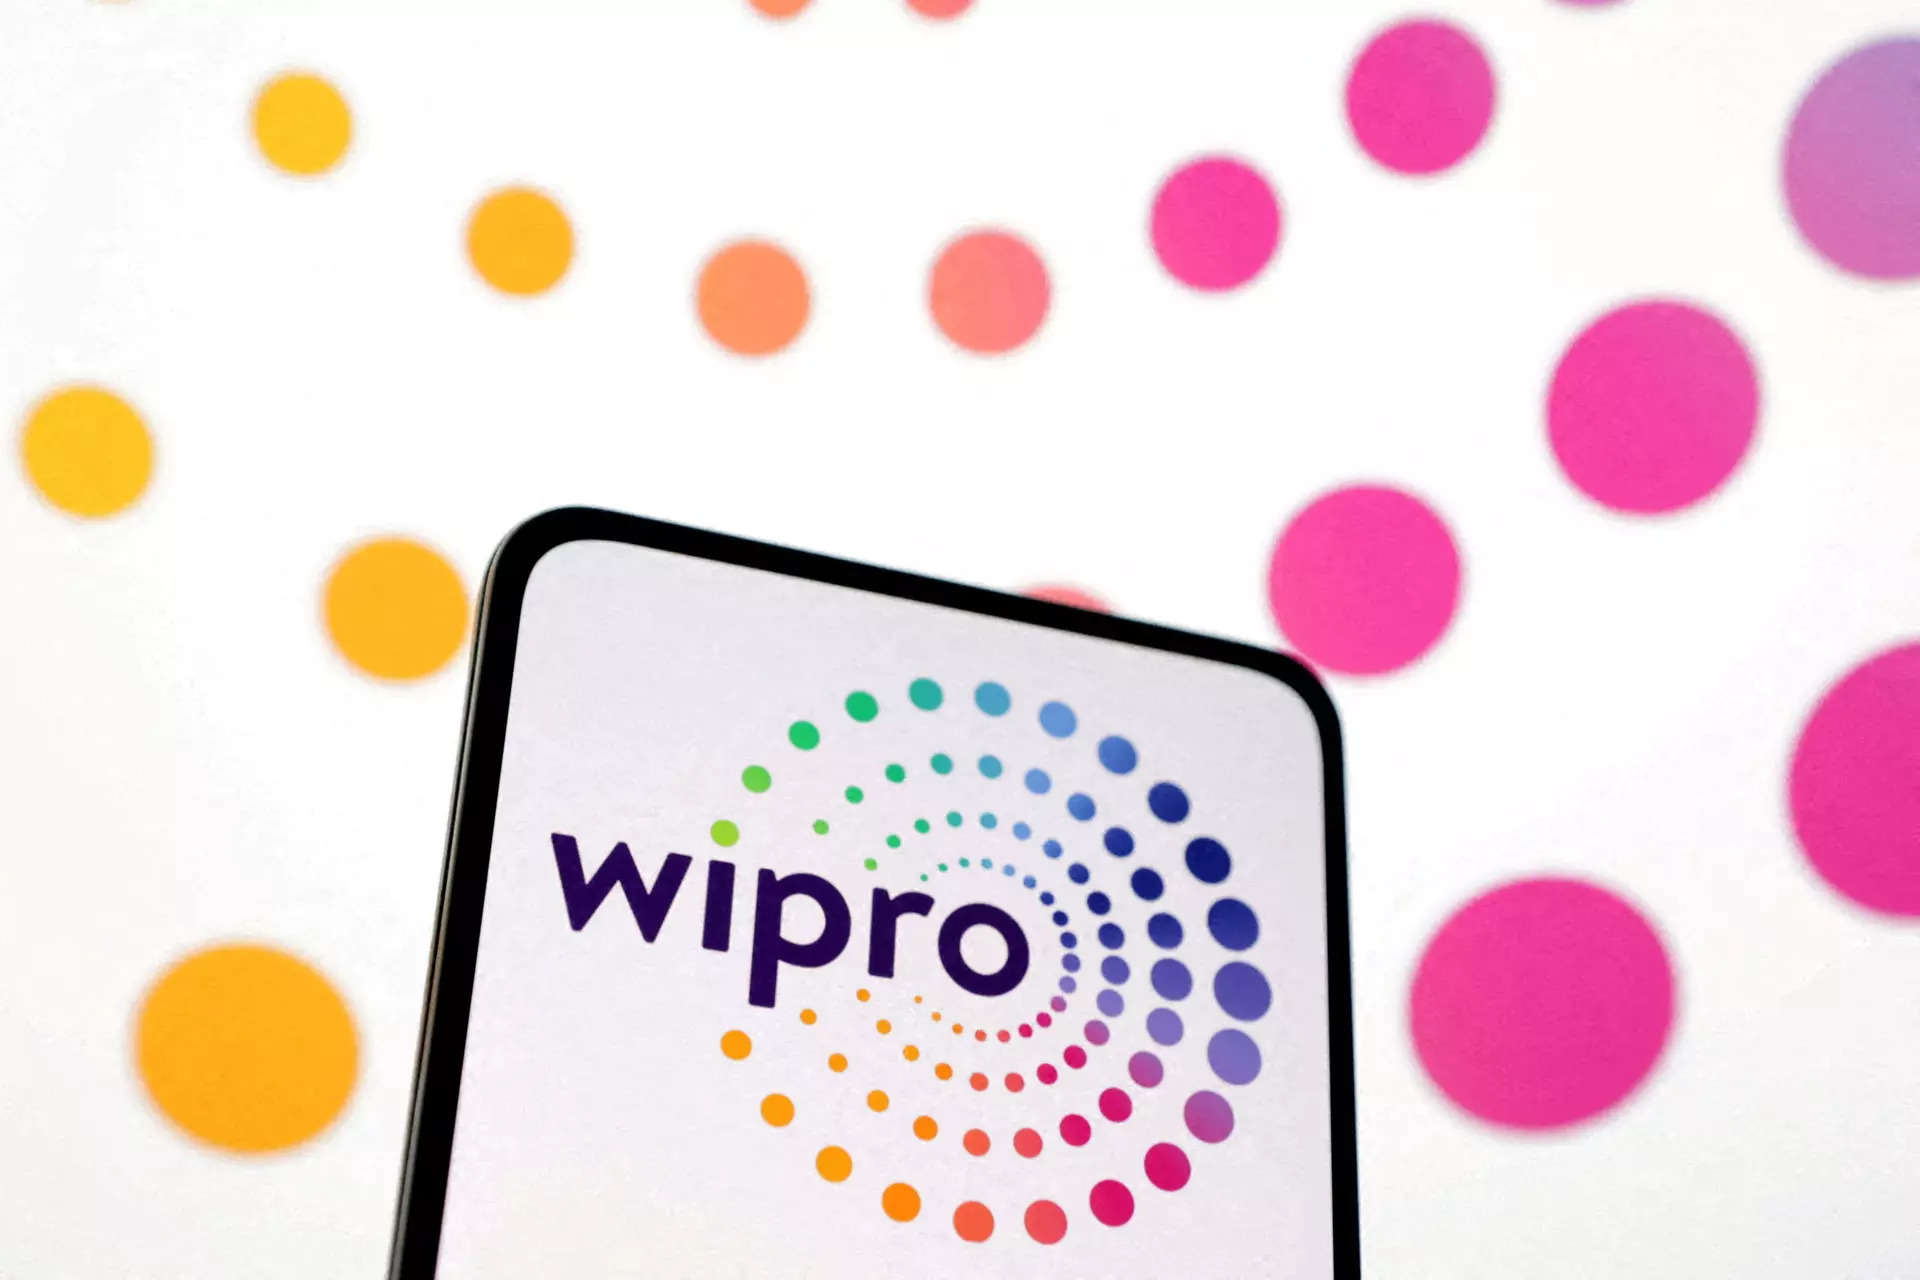 Wipro Consumer Care expands horizons: Enters D2C space with Bio-essence, plans FMCG start-up investments 